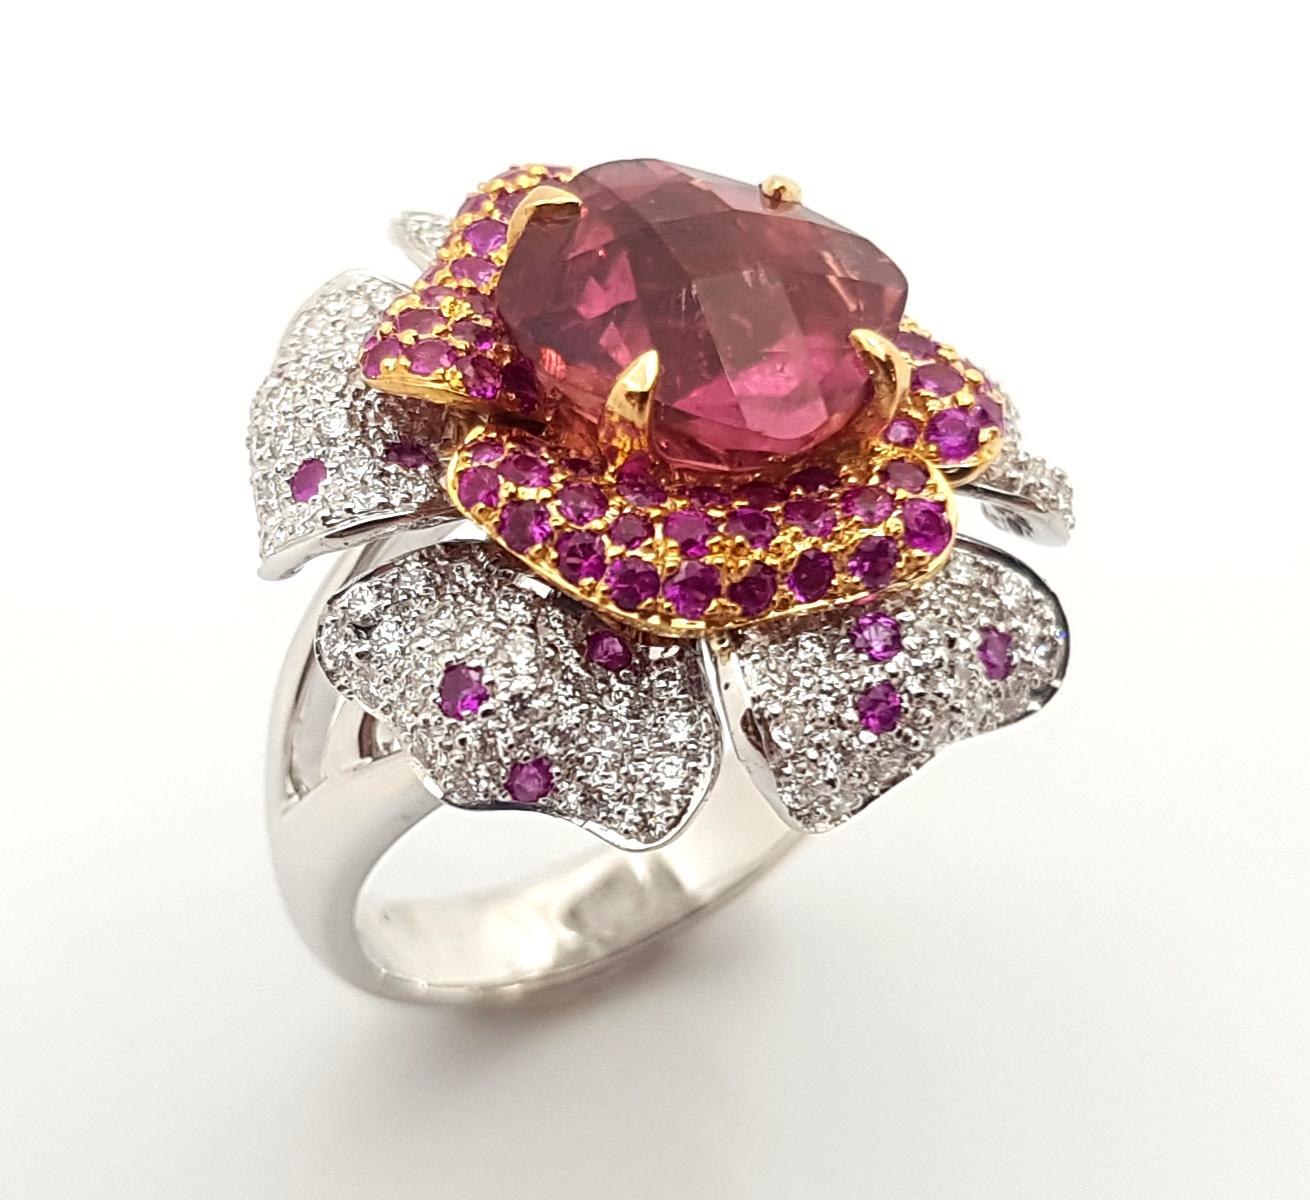 Pink Tourmaline, Pink Sapphire and Diamond Flower Ring set in 18K White Gold For Sale 7